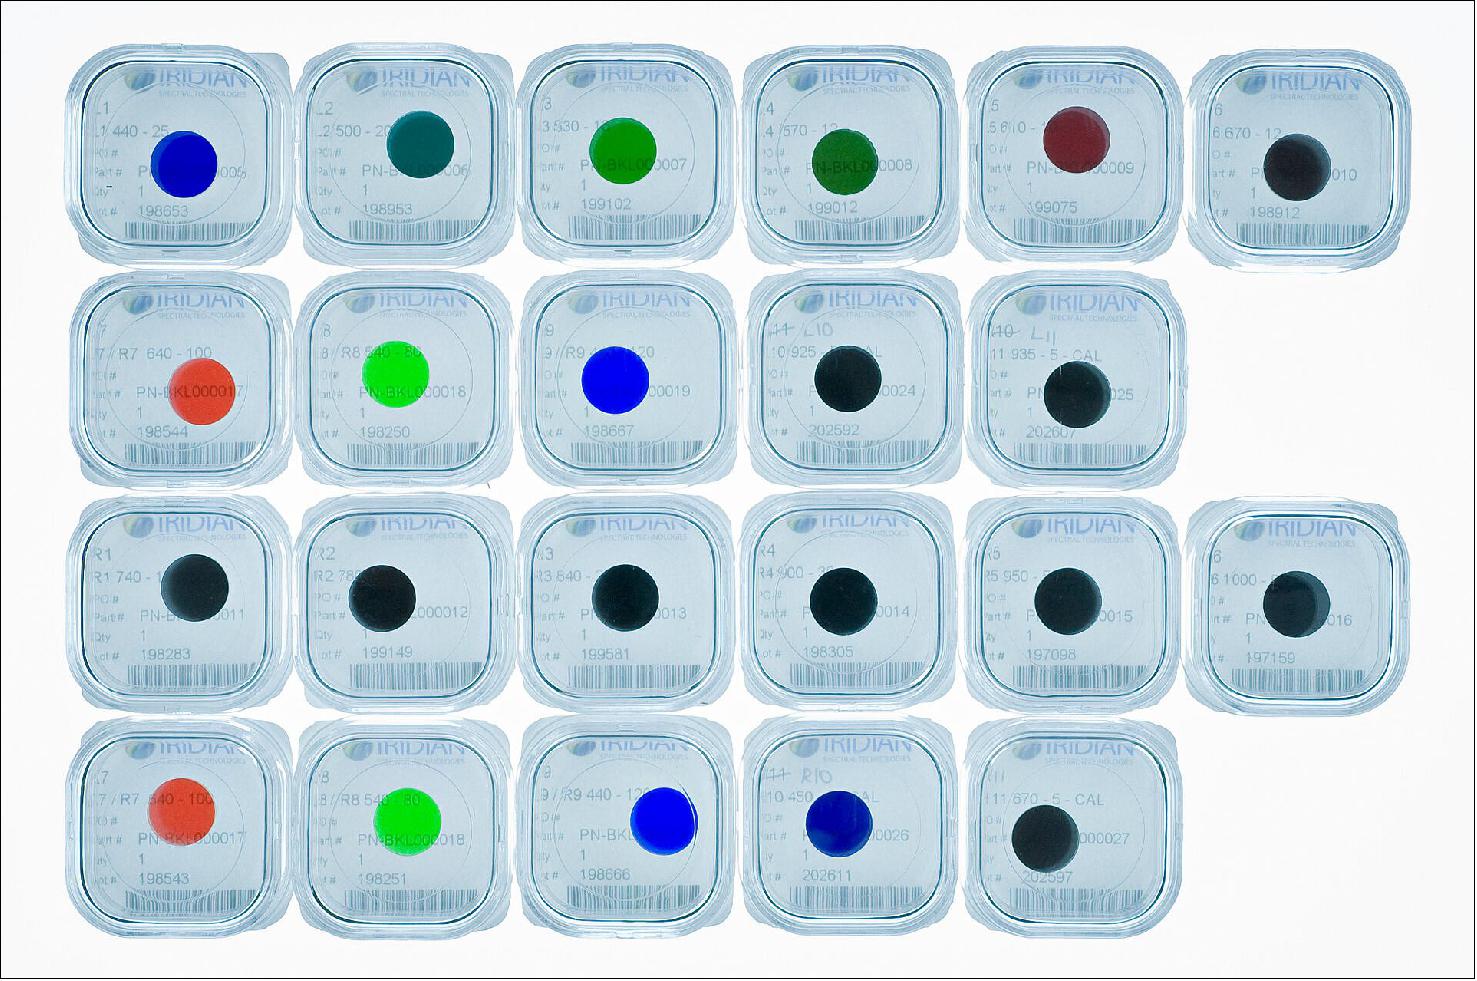 Figure 21: ExoMars PanCam filters. This may look like a collection of colorful contact lenses and in some respects there are some similarities: these are the filters through which the ExoMars rover – Rosalind Franklin – will view Mars in visible and near infrared wavelengths. - They are pictured here in their individual transport cases, before they were installed in the filter wheels of the Panoramic Camera, PanCam, which comprises two wide-angle cameras and a high-resolution camera. The wide-angle cameras are mounted at each end of the PanCam unit and form a stereo pair. Each camera has a filter wheel with 11 positions. Red, green and blue broadband imaging filters for color stereo imaging are common to both left and right cameras; the remaining eight are different between left and right to provide the range of filters needed for geological and solar imaging. The geology filters have been specifically selected to identify water-rich minerals and clays on Mars. - PanCam also hosts a high-resolution color camera and, sitting on a mast 2 m above the martian surface, will be fundamental in the day-to-day scientific operations of the rover, its images essential to assist with scientific decisions on where to drive to next, and where to target its drill. The rover will be the first with the capability to drill 2 m below the surface to retrieve samples for analysis in its onboard laboratory, seeking signs of life past or present. Combined with observations with its spectrometers, close-up imager, sub-surface sounding radar and neutron detector, the ExoMars rover has a powerful payload to explore the surface and subsurface of Mars. - The filters of the wide-angle camera shown here were integrated into their filter wheels in 2018 and completed calibration testing on 11 May 2019. Just last week the entire PanCam instrument was shipped from University College London’s Mullard Space Science Laboratory and delivered to Airbus, Stevenage, in the UK, where it will soon be built into the rover, giving Rosalind Franklin rover her science eyes. (image credit: M. de la Nougerede, UCL/MSSL)